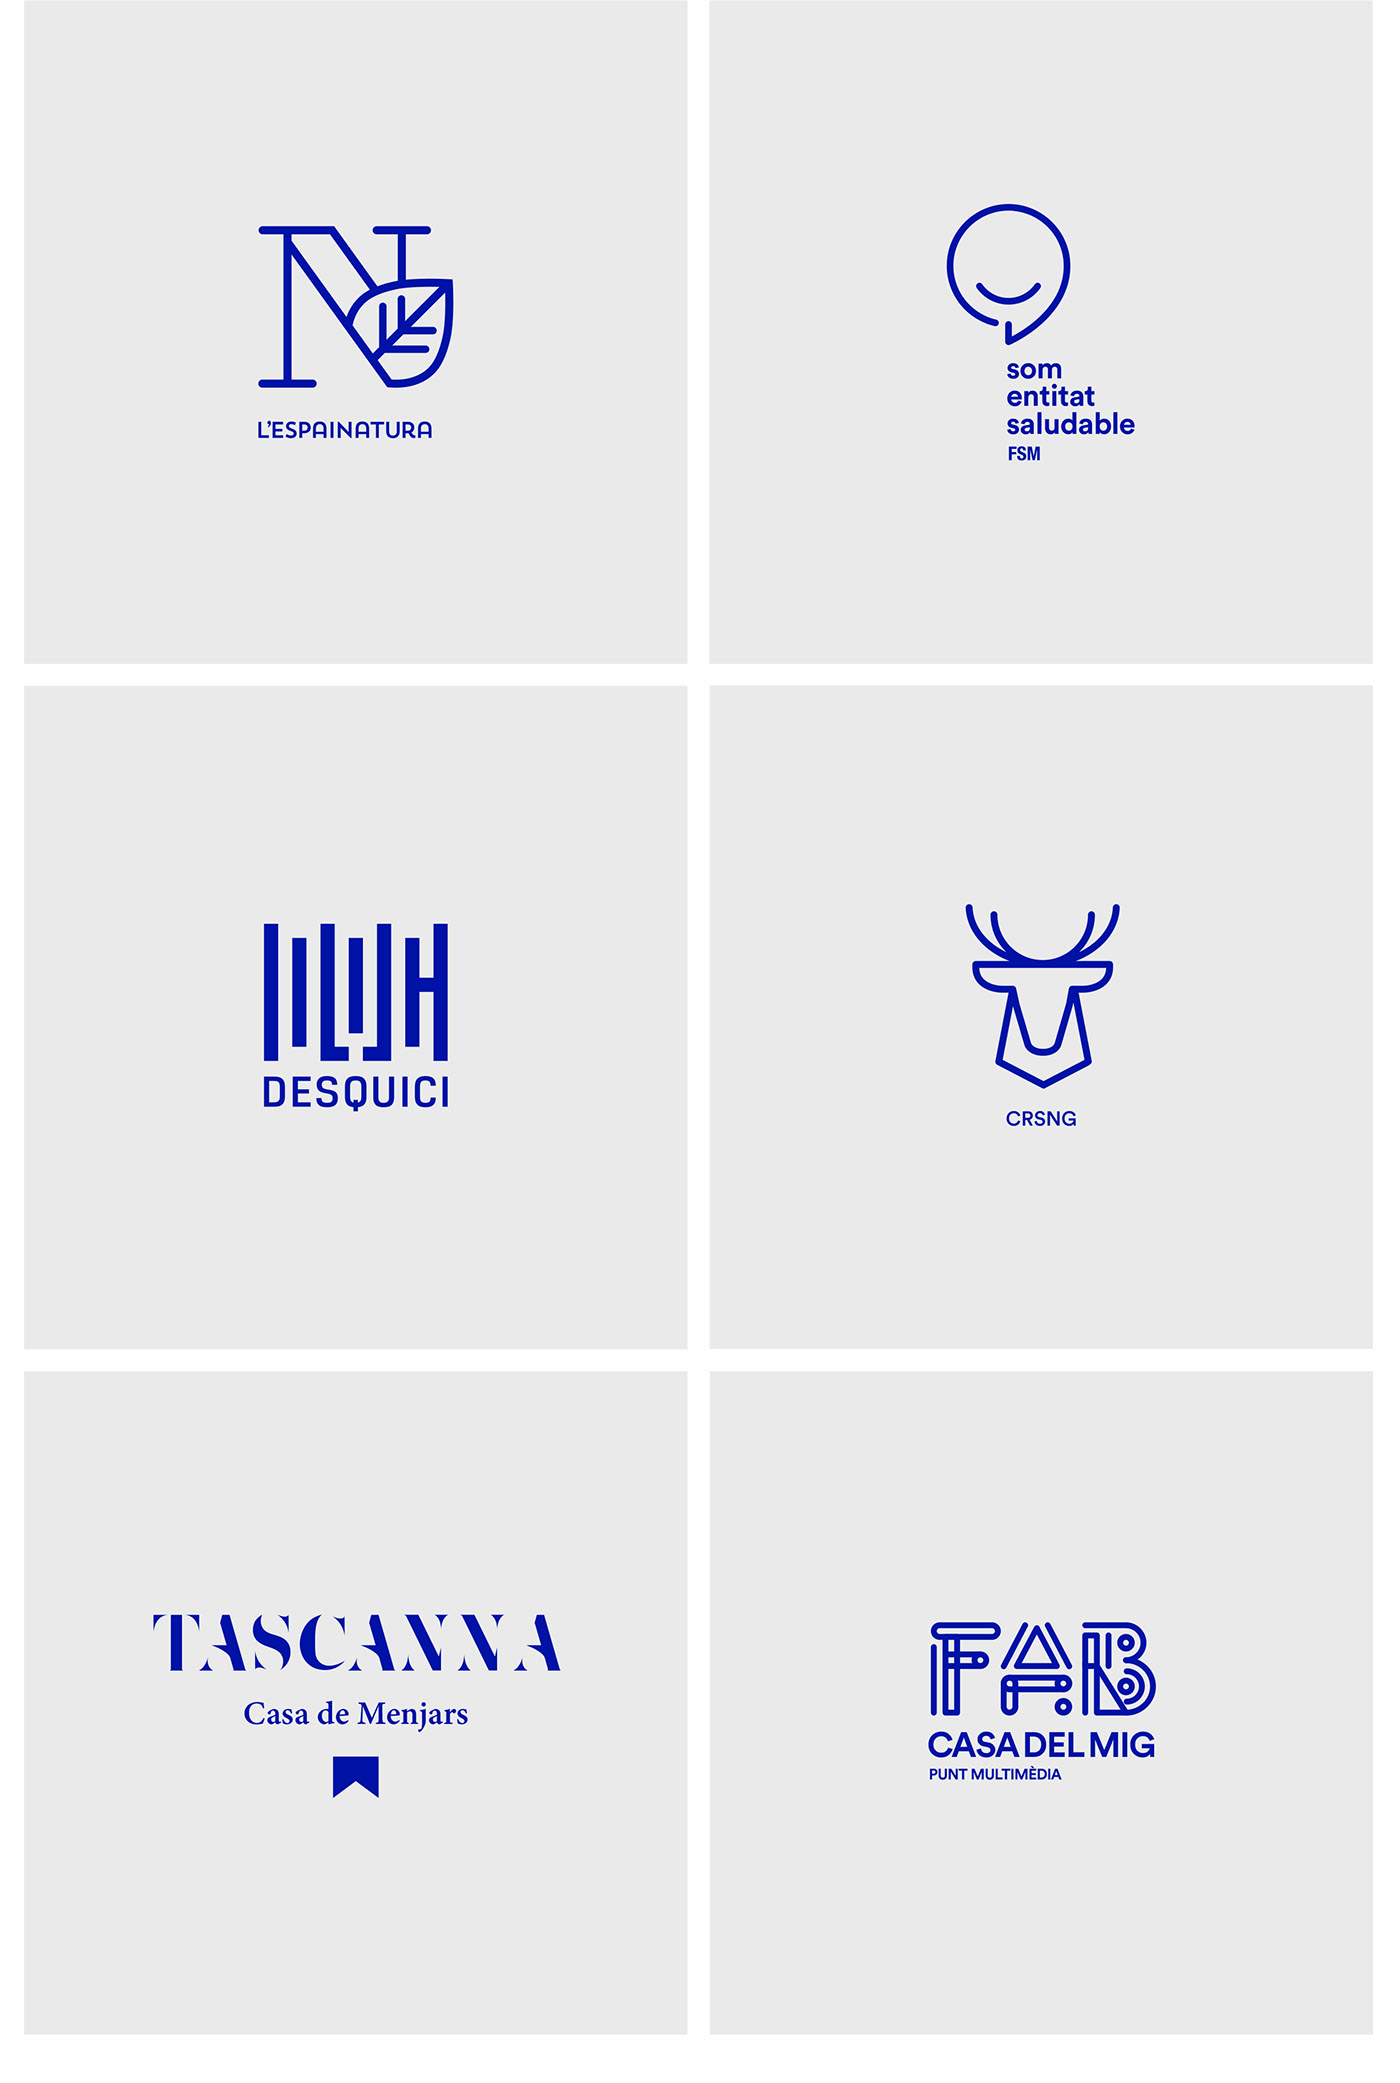 visual branding projects developed between the years 2018/2019 selected to be displayed "Best of year". marcas branding  logos logo